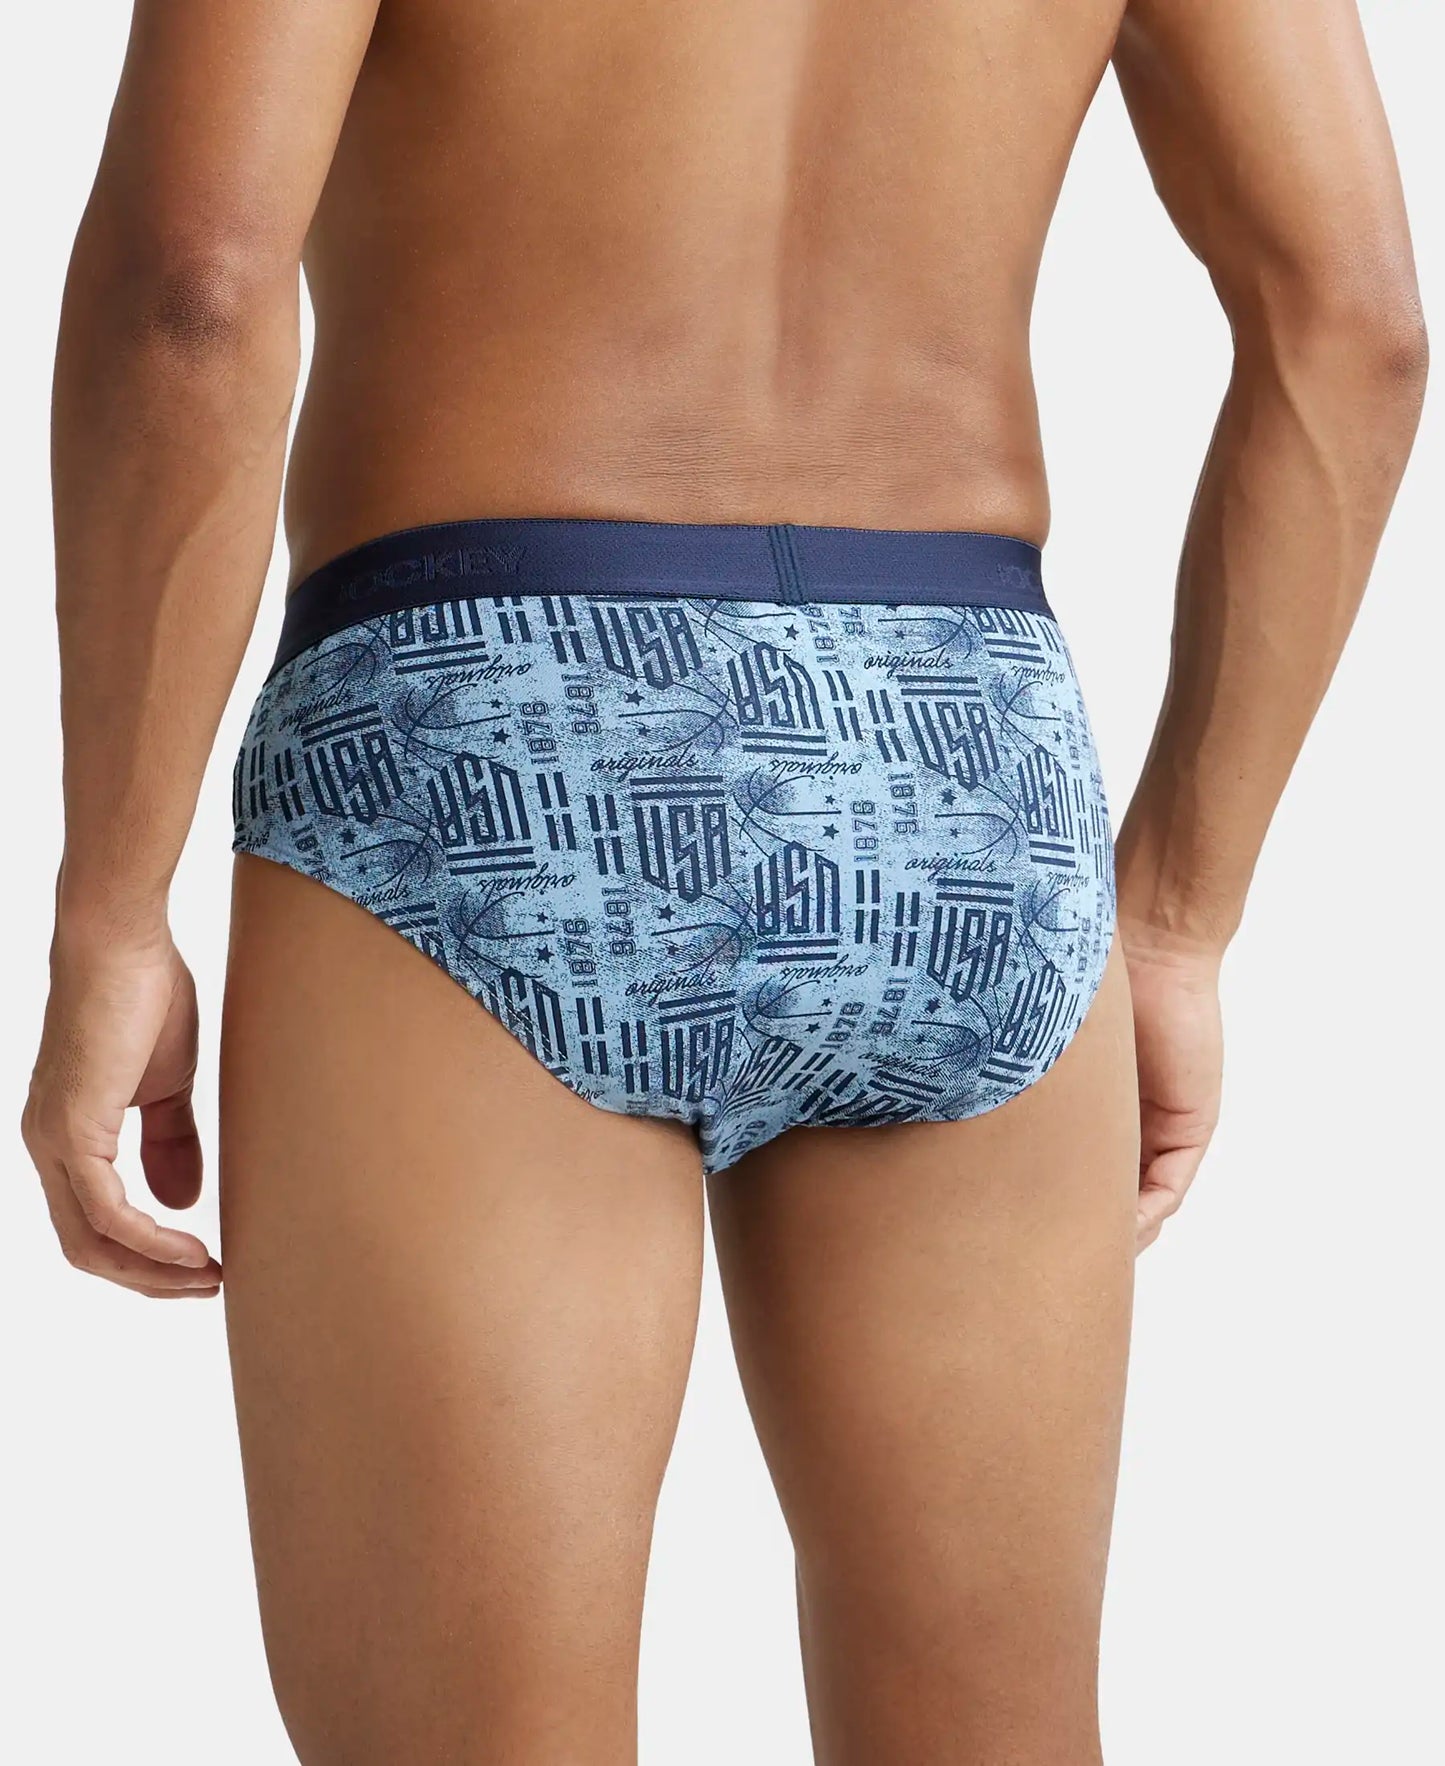 Super Combed Cotton Printed Brief with Ultrasoft Waistband - Navy Dusk Blue-7